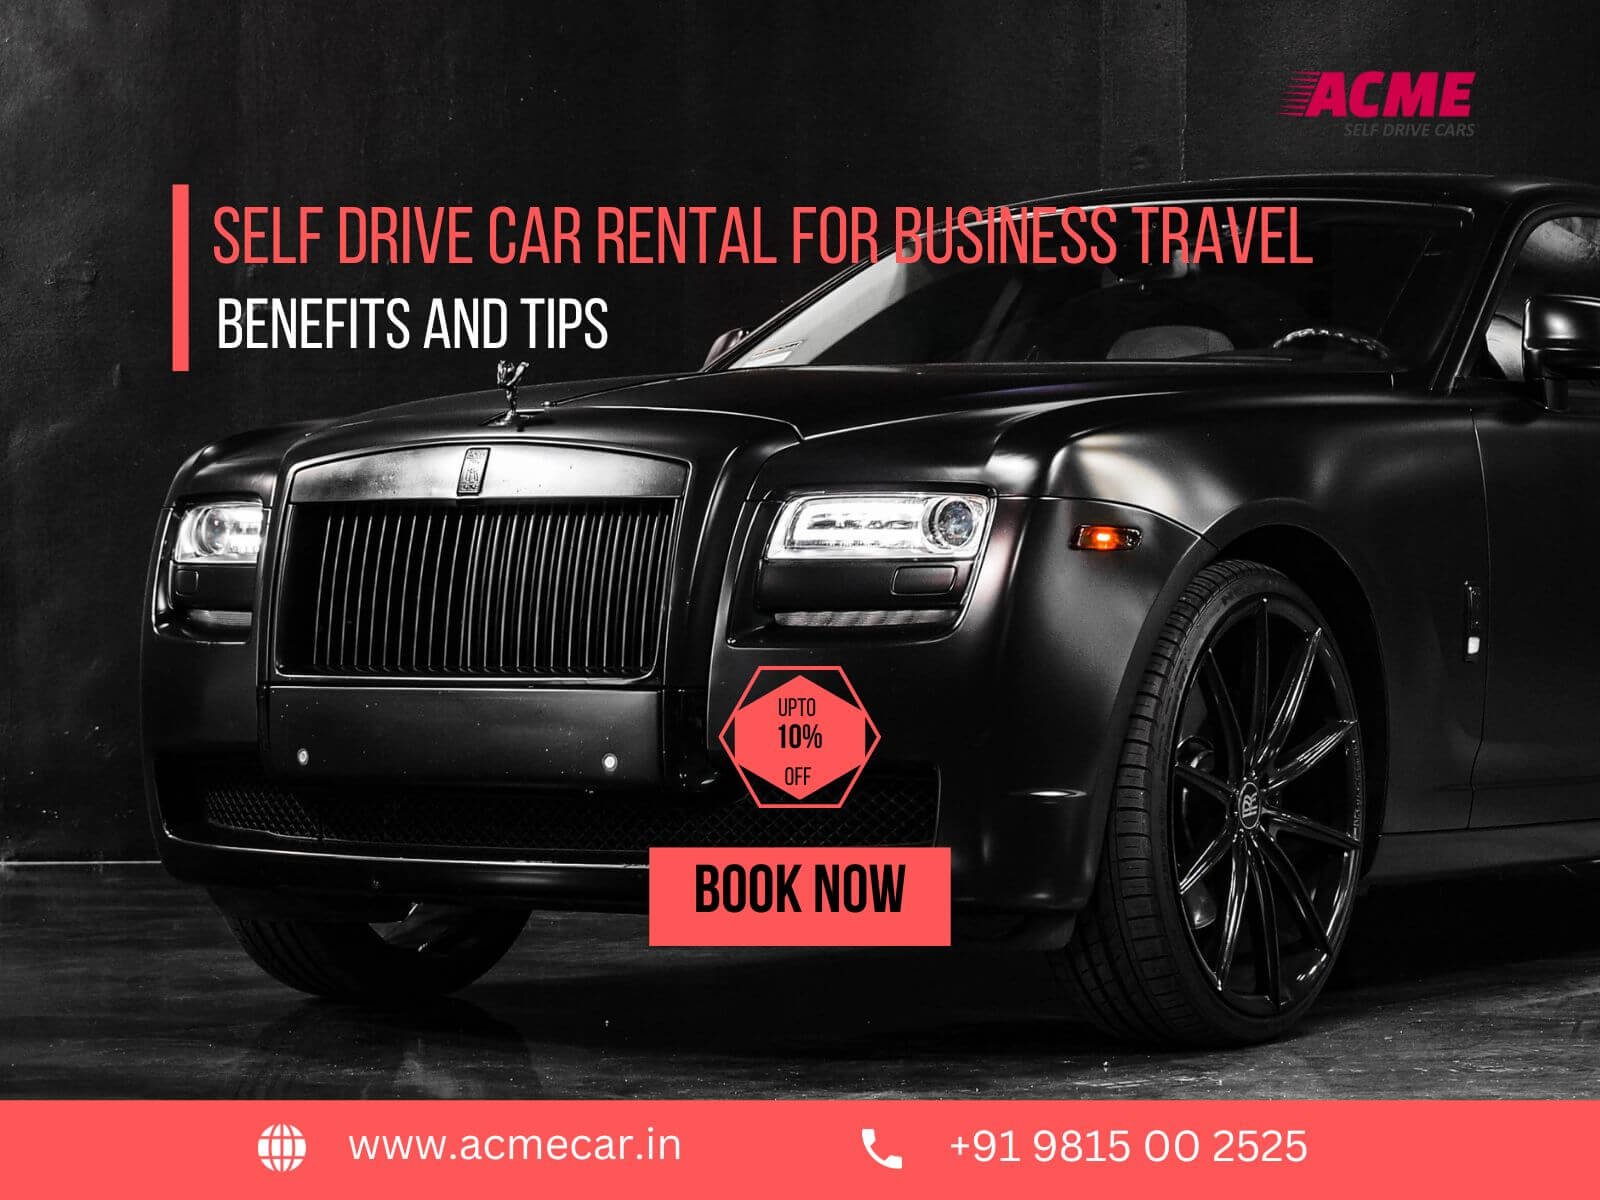 Self Drive Car Rental for Business Travel: Benefits and Tips - ACMECar - Self-Drive Cars